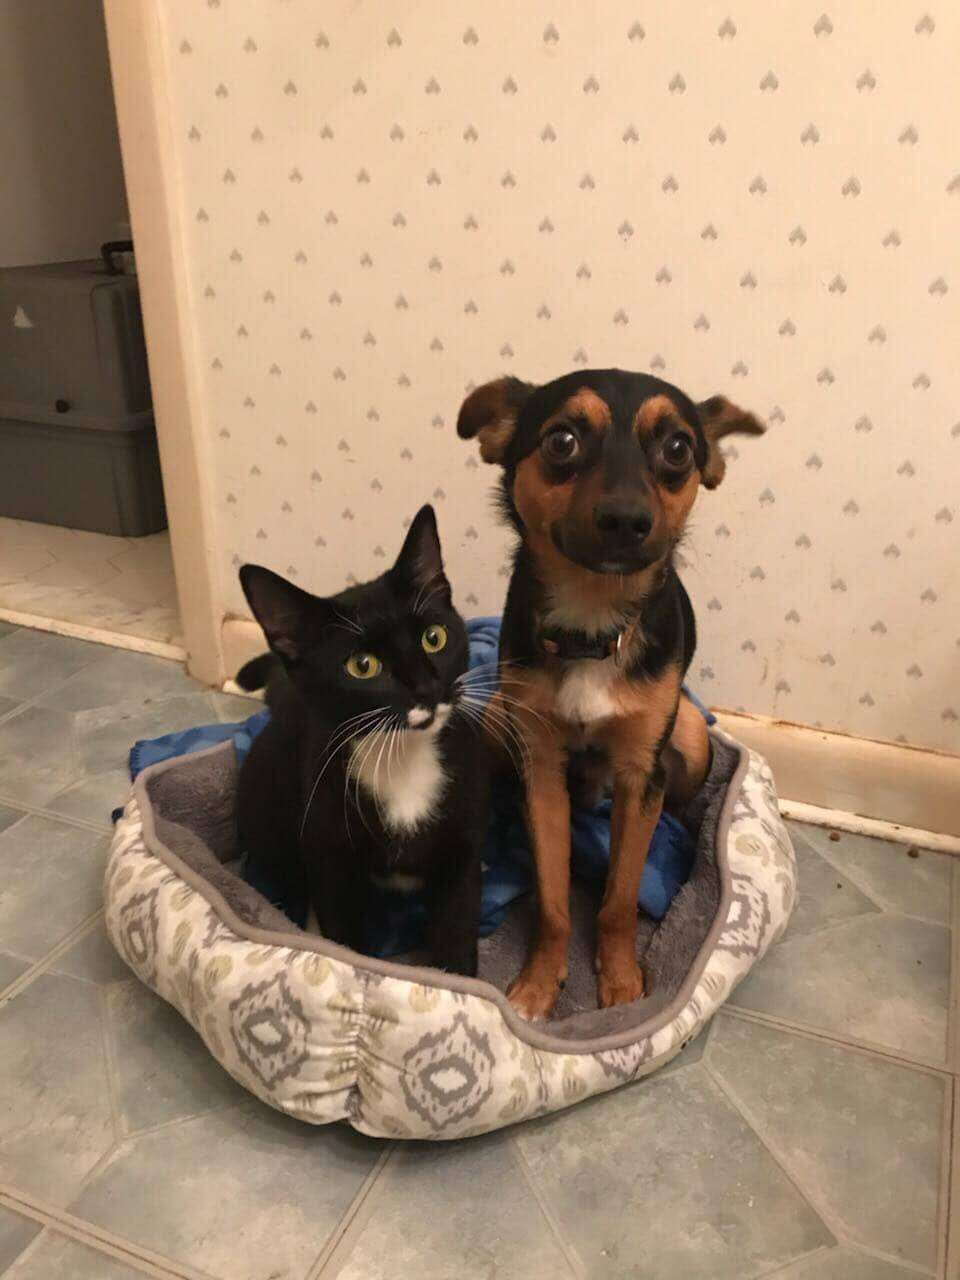 Bonded kitten and dog friends at their foster home Hampton Roads, VA